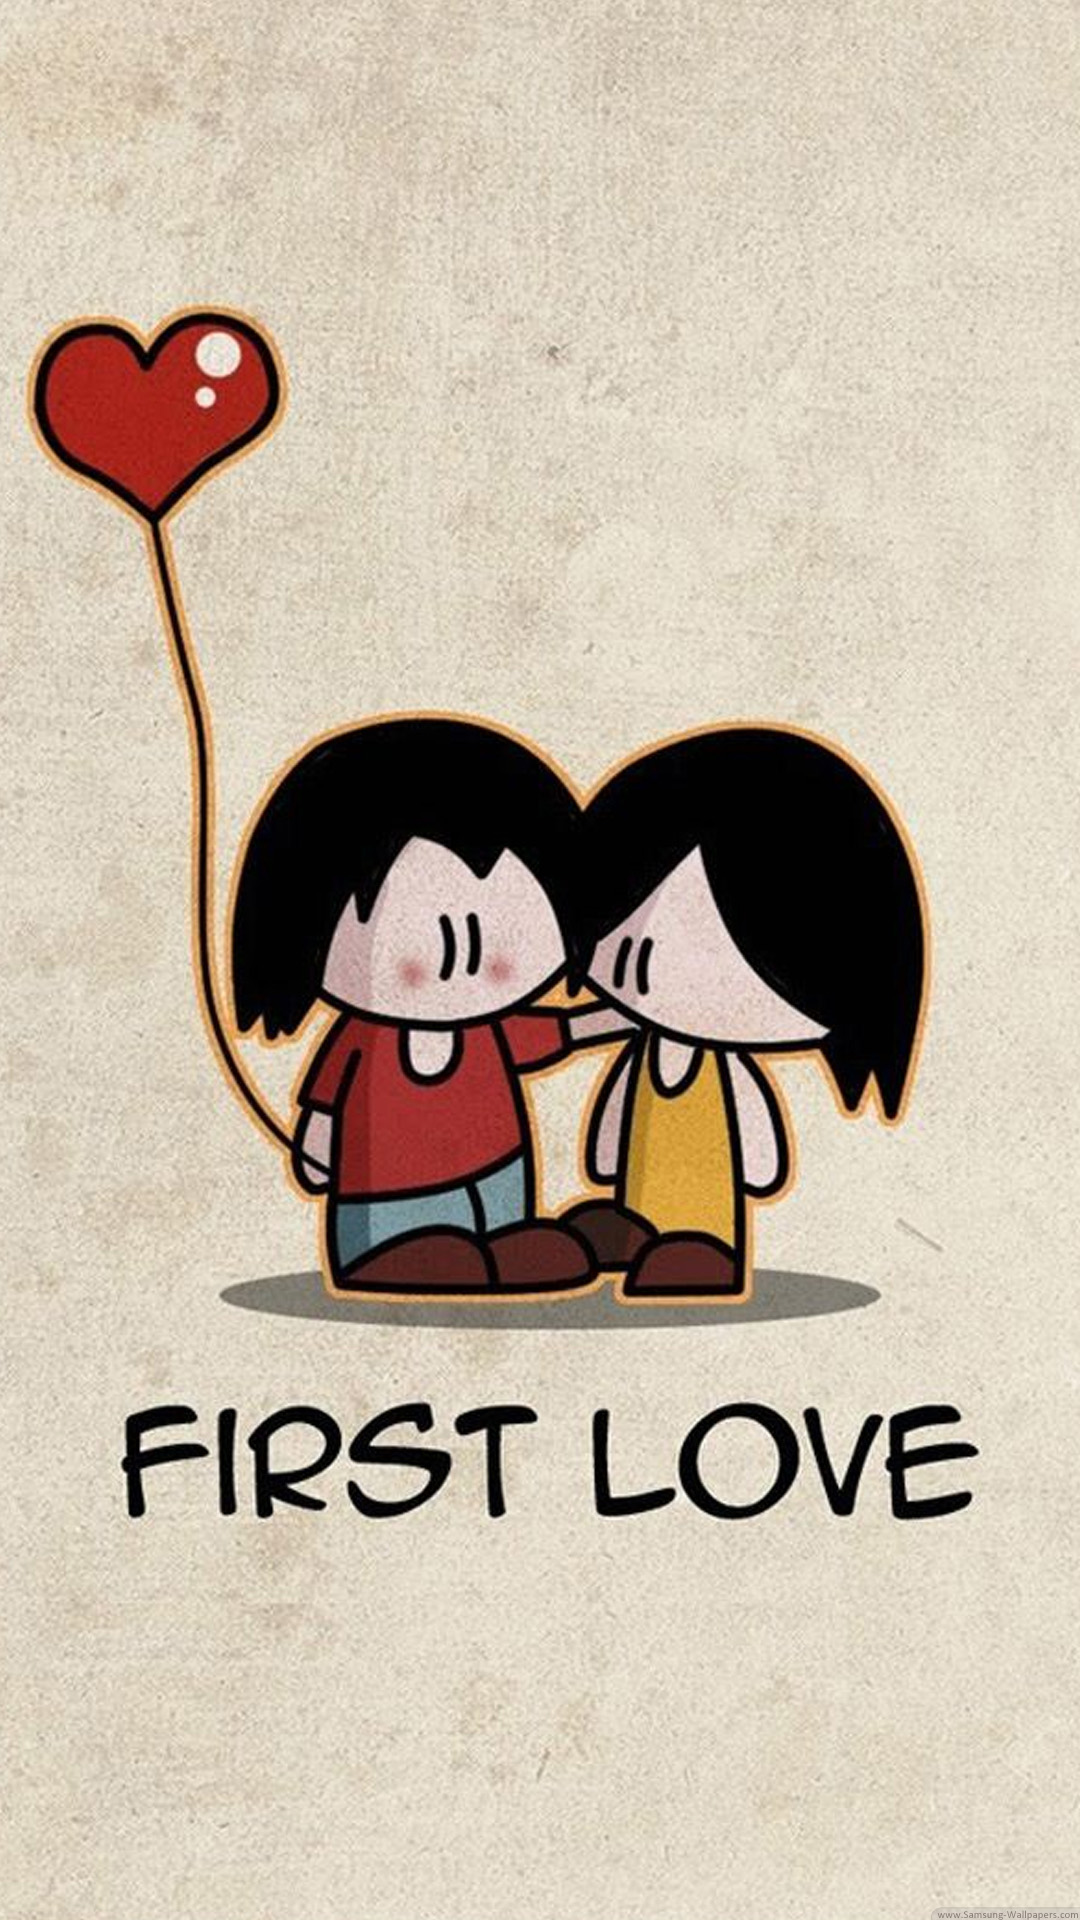 Love Cartoon Wallpapers For Mobile Hd - 1080x1920 Wallpaper 